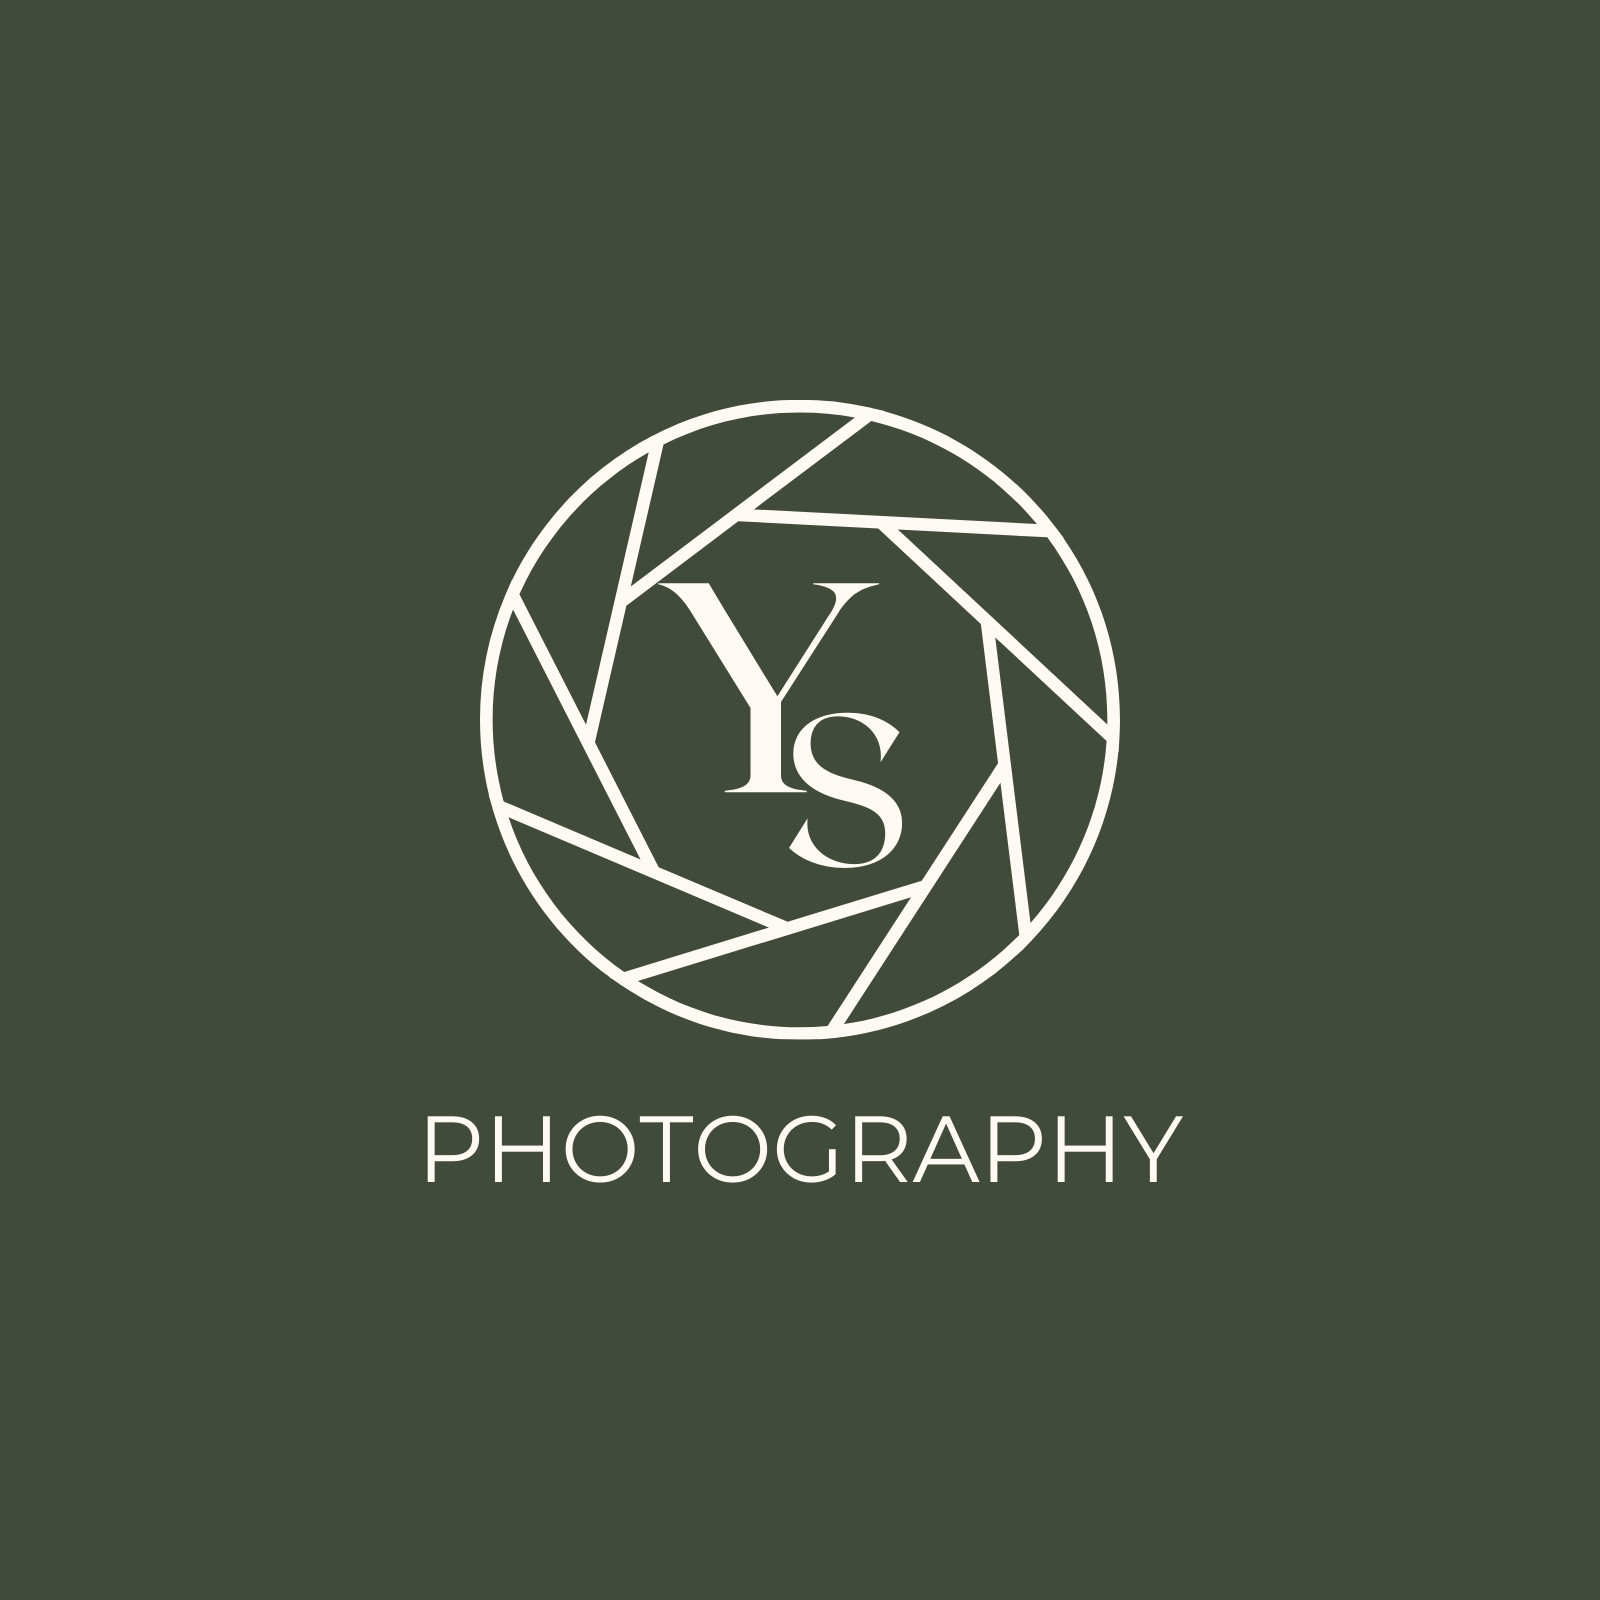 Photography Logo Concept by Sarah Pezzullo on Dribbble